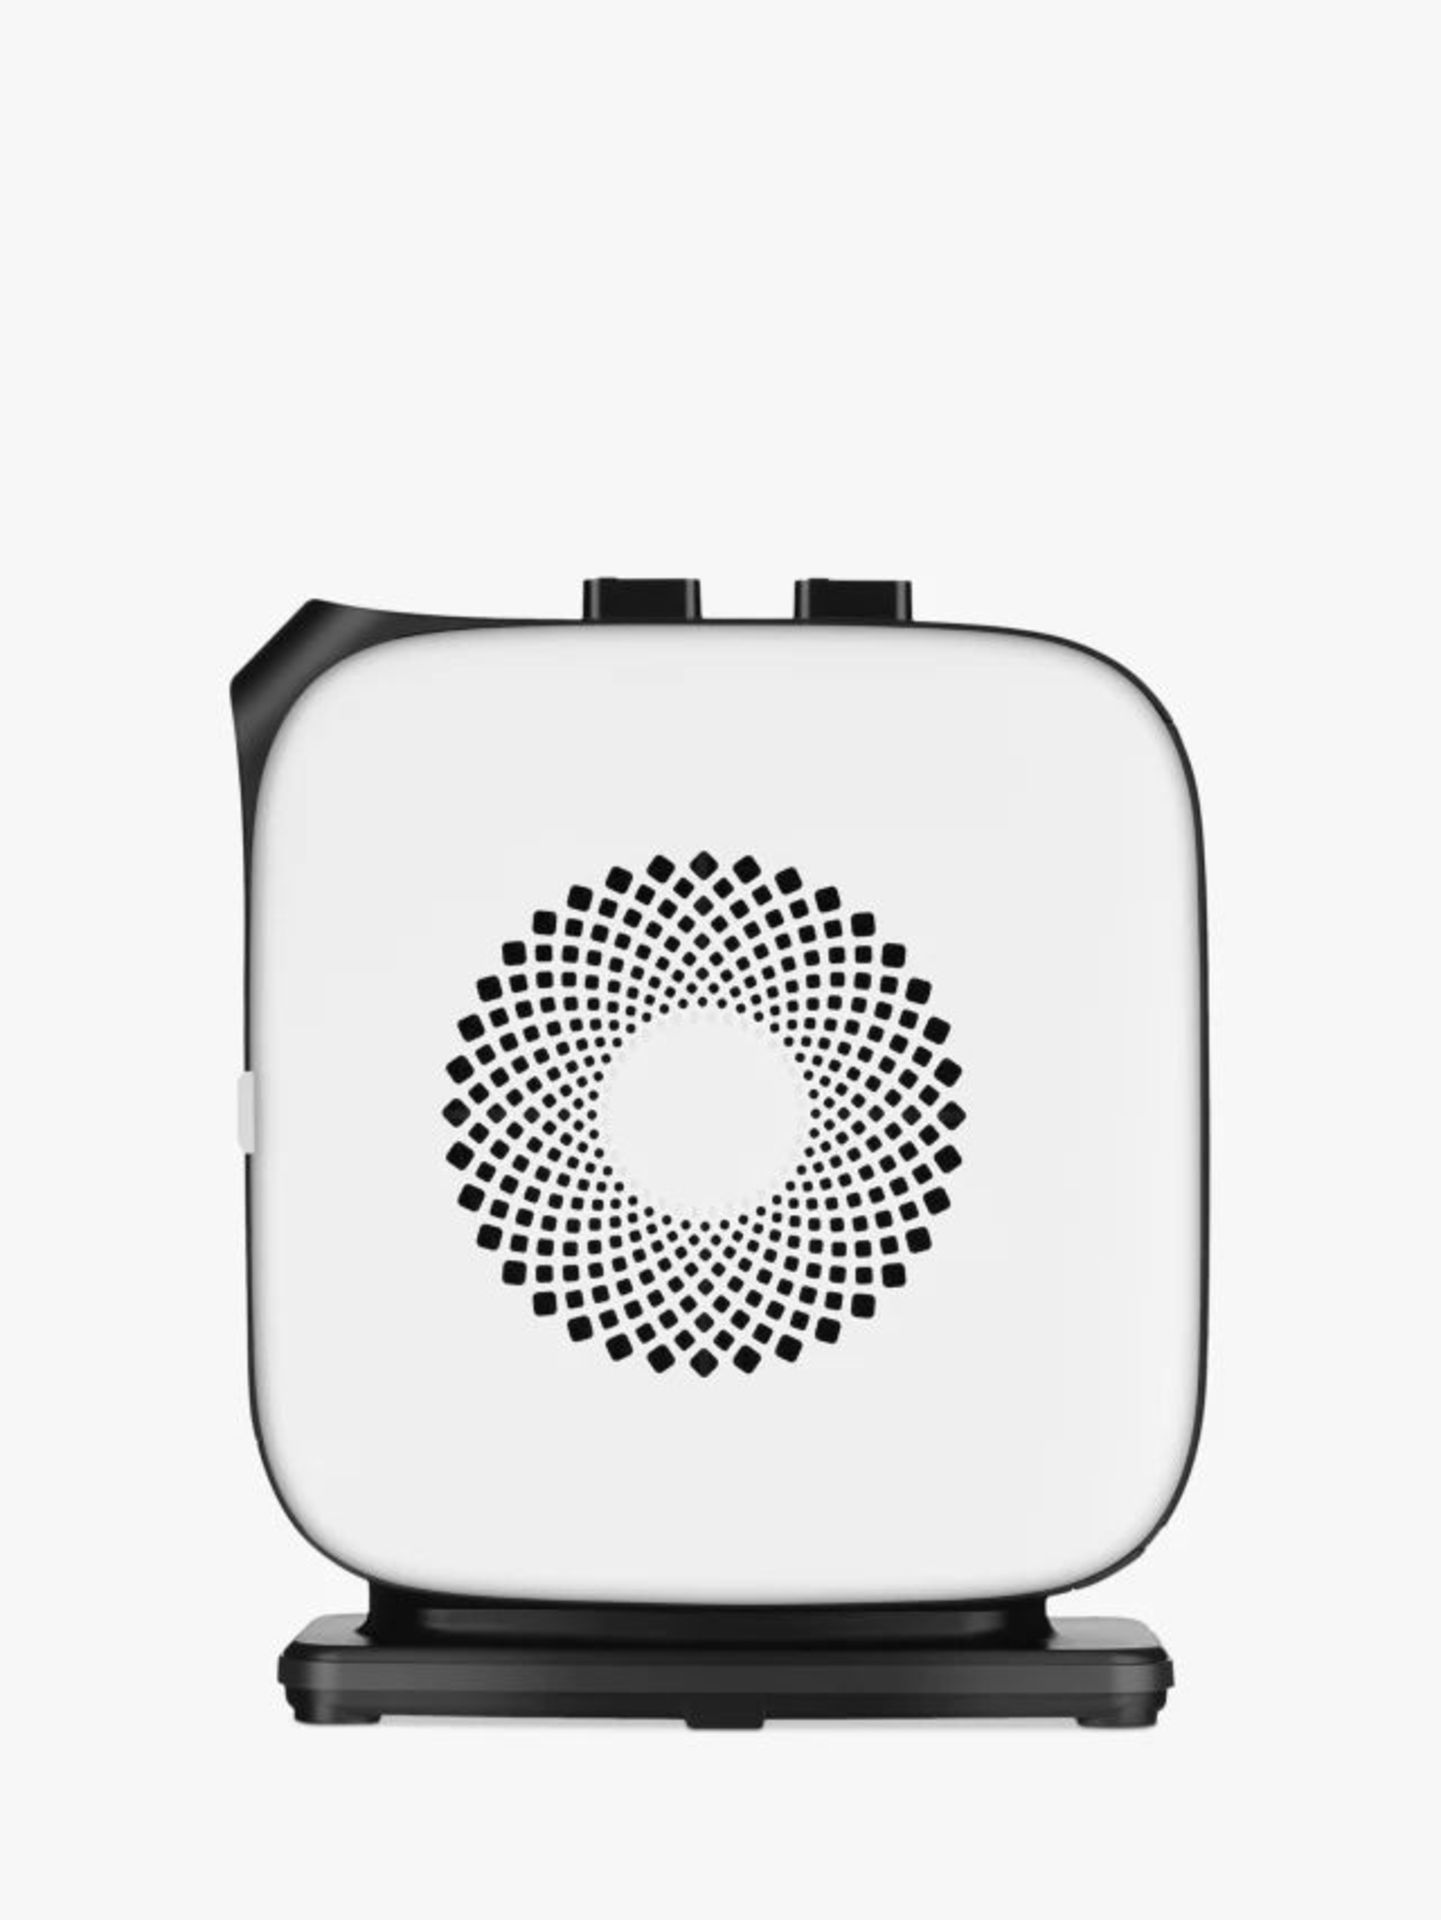 John Lewis Square Fan Heater, White. - EBR1. Our compact square fan heater has a multi-stage